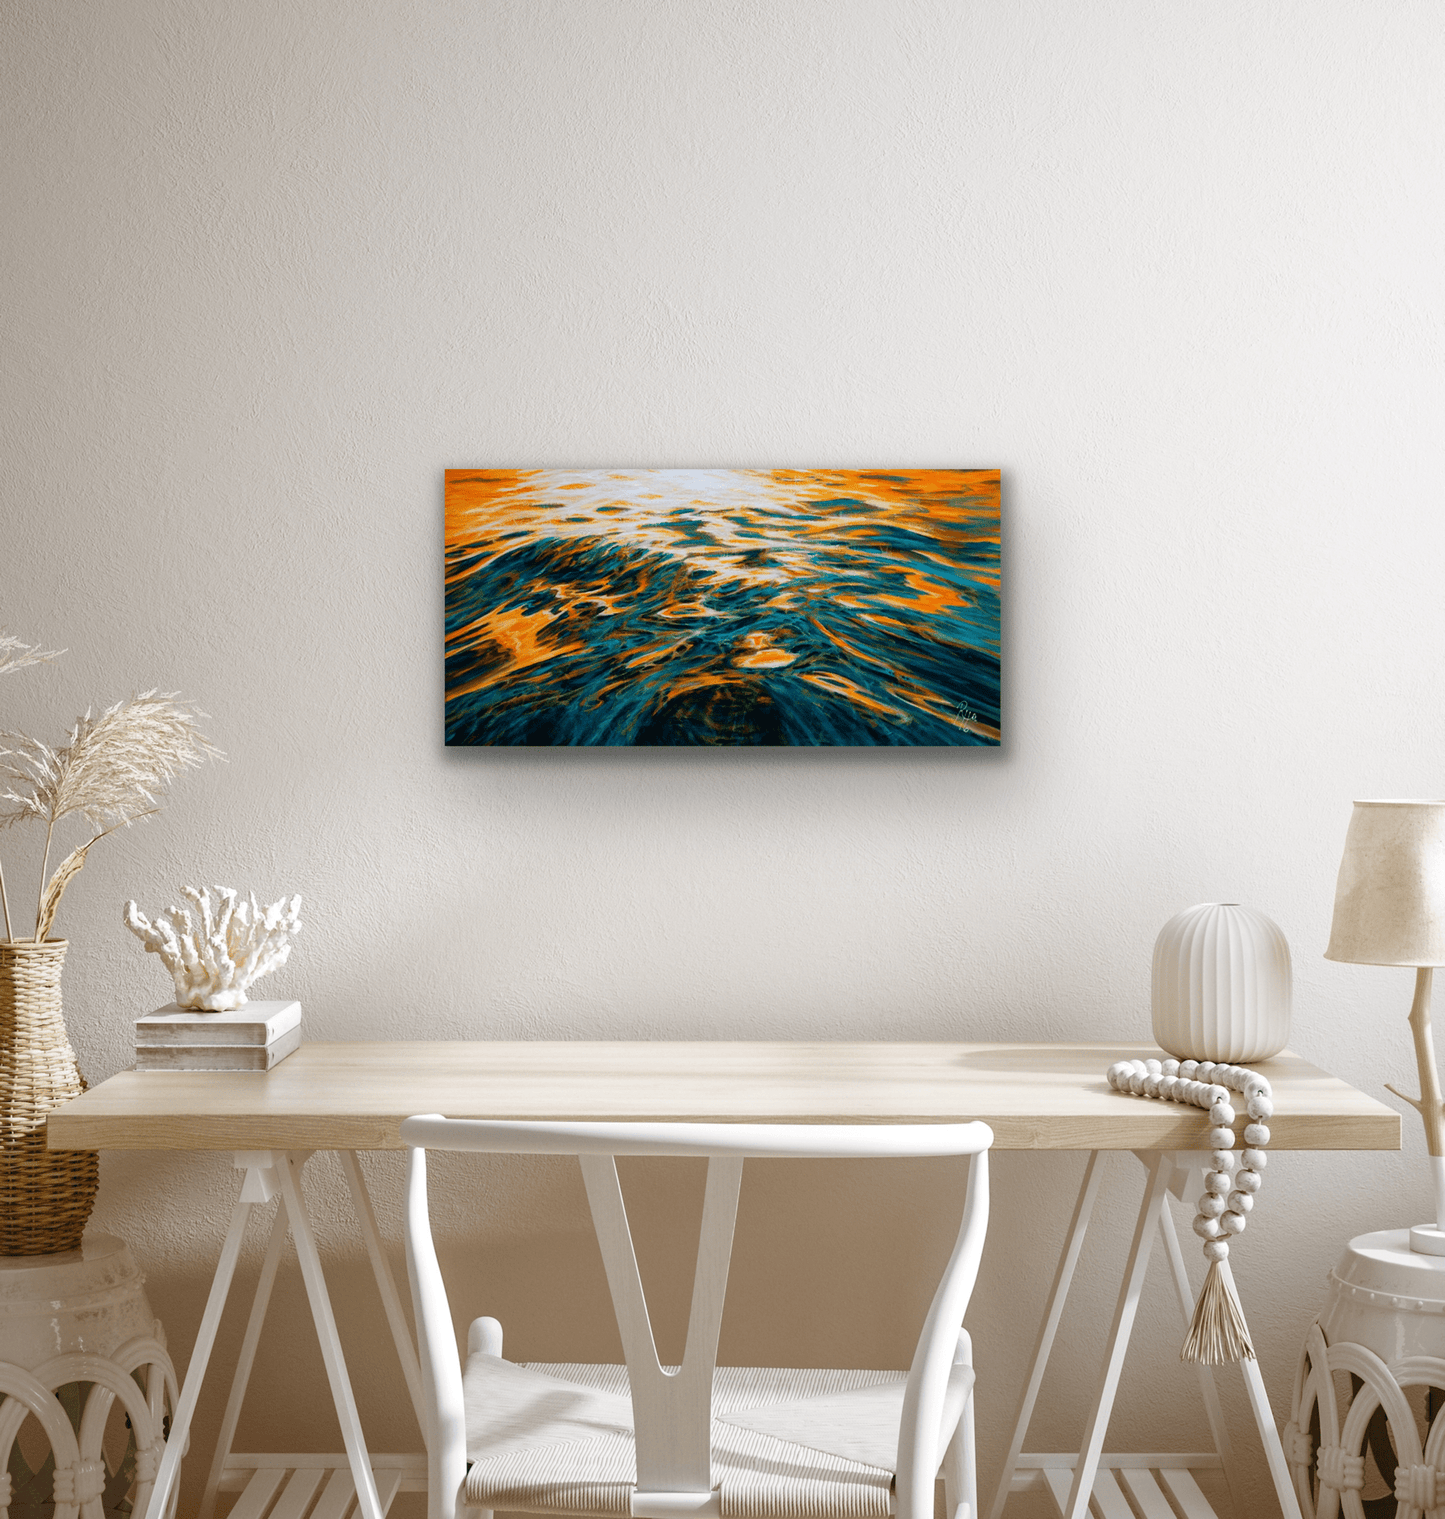 "Evening Fire" original painting is of a wave reflecting a hot summer days sunset.